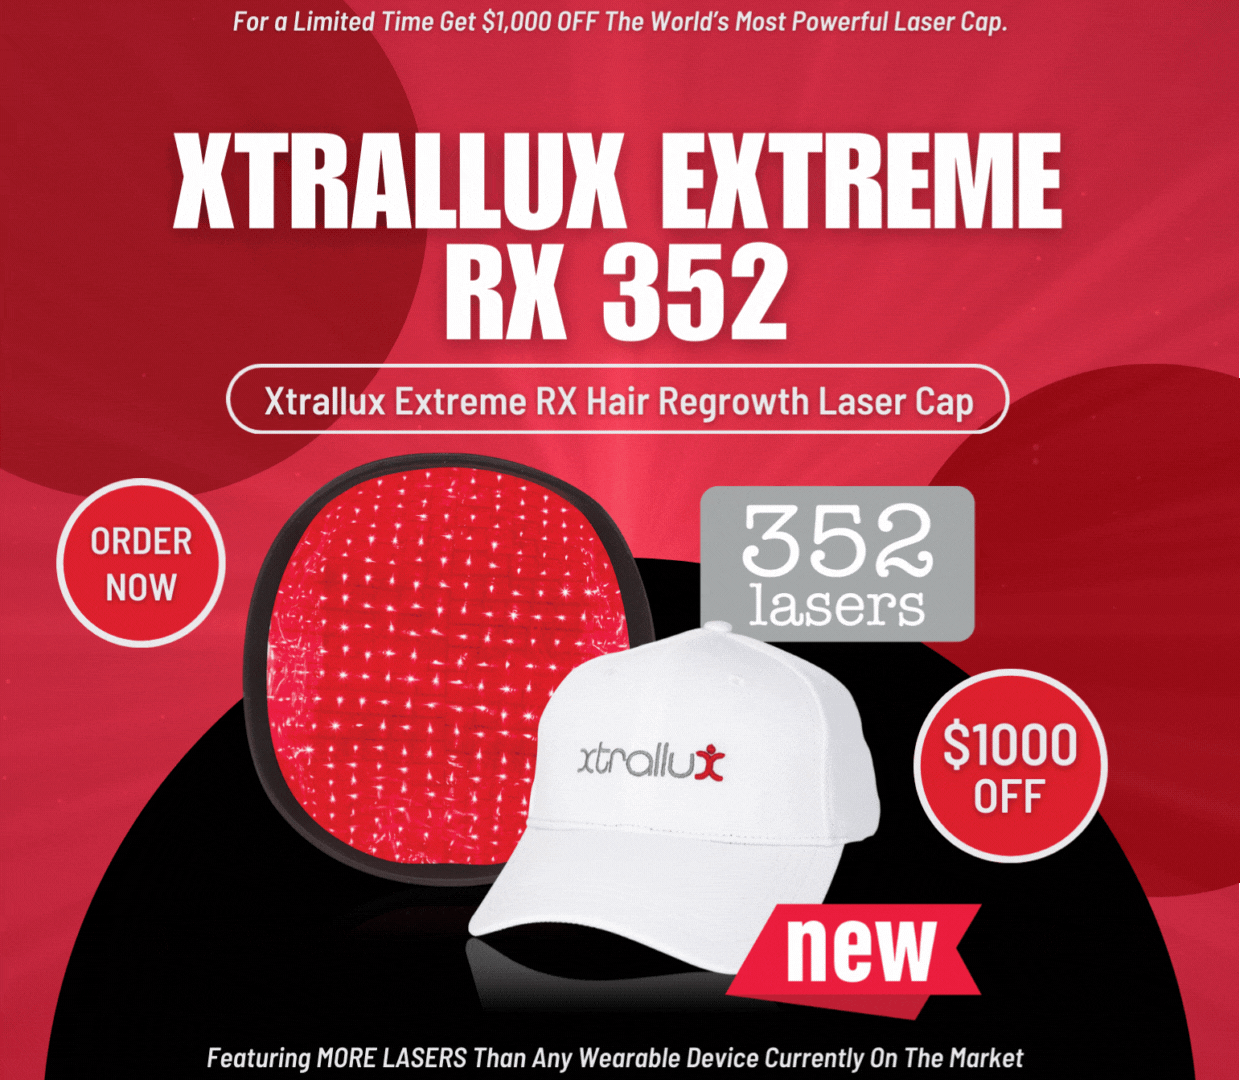 Now Offering a $1000 Rebate on the Xtrallux RX 352